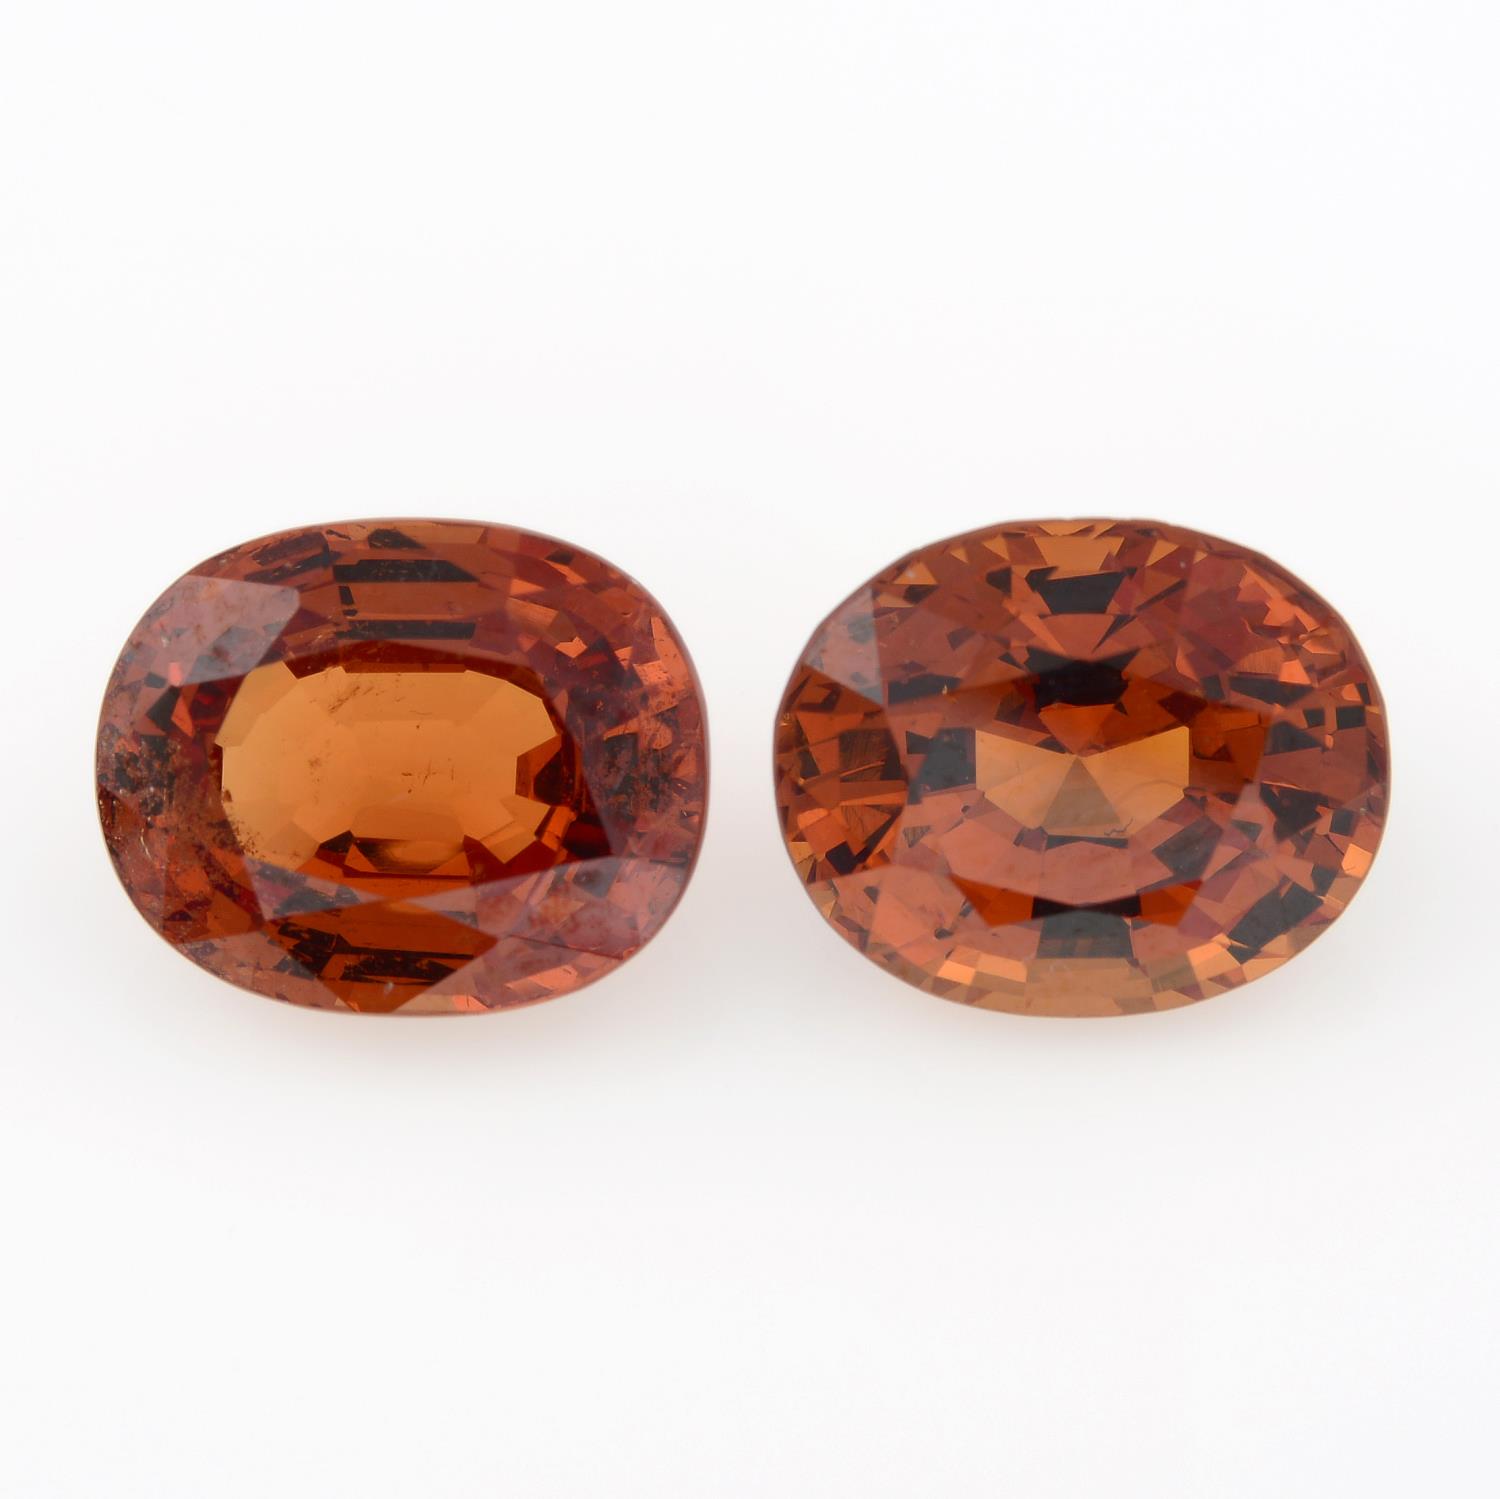 Two oval spessartite garnets, weighing 9.79ct.